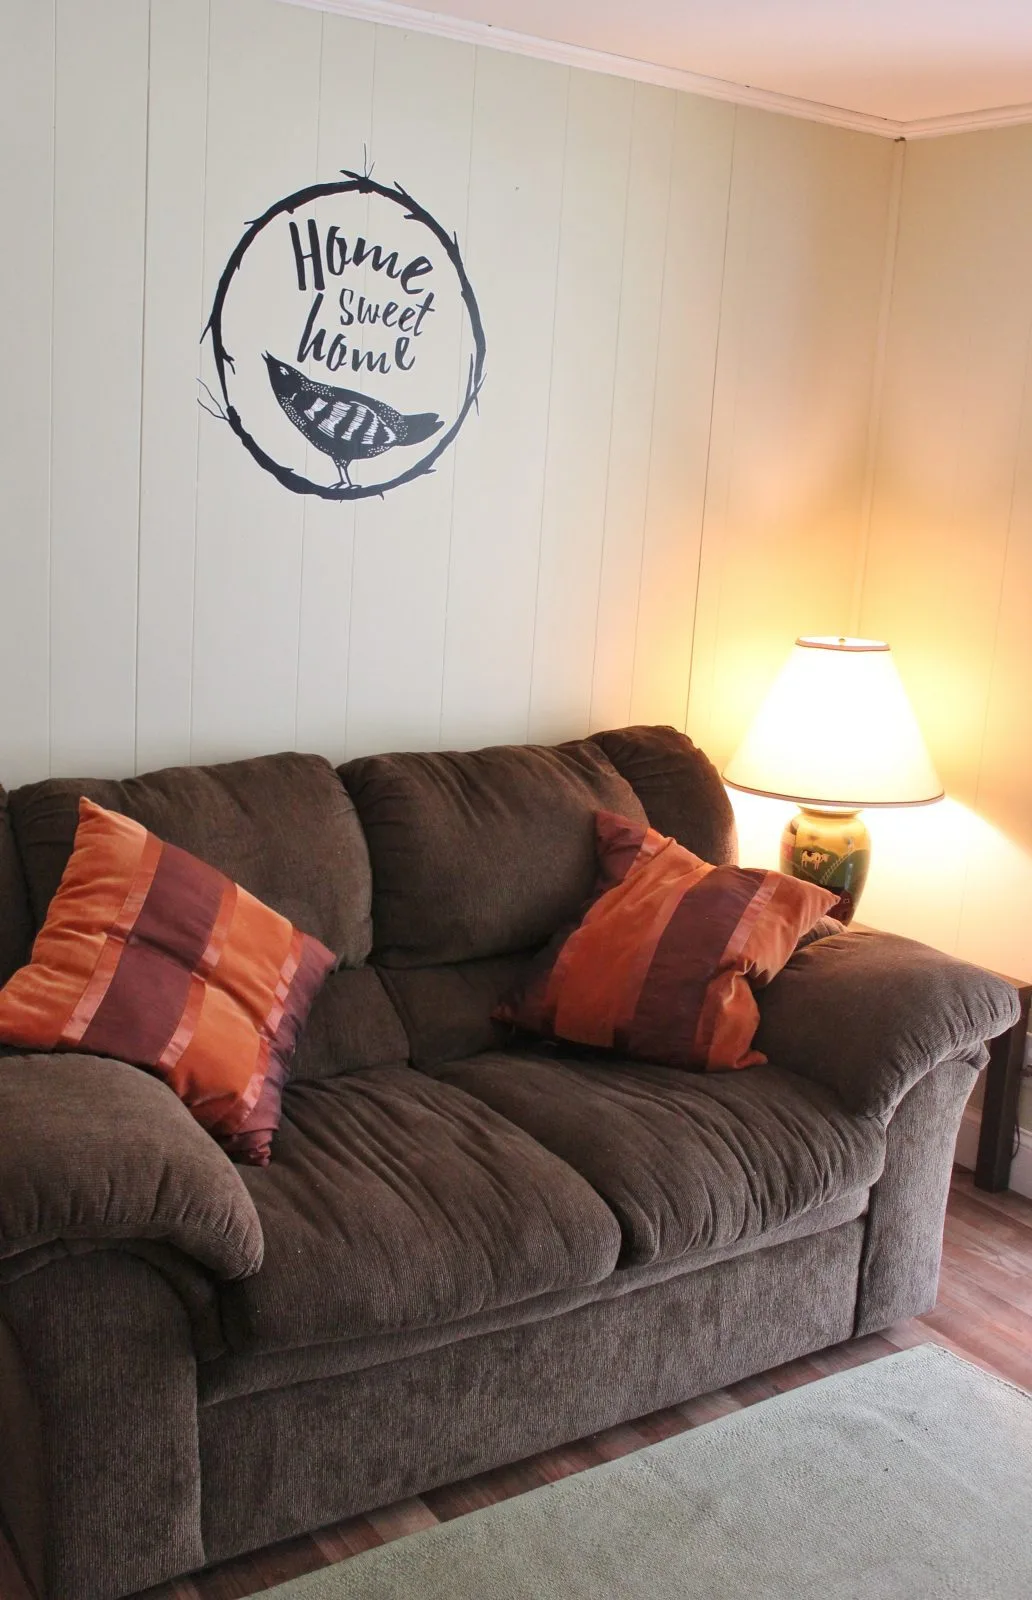 home sweet home decal over love seat